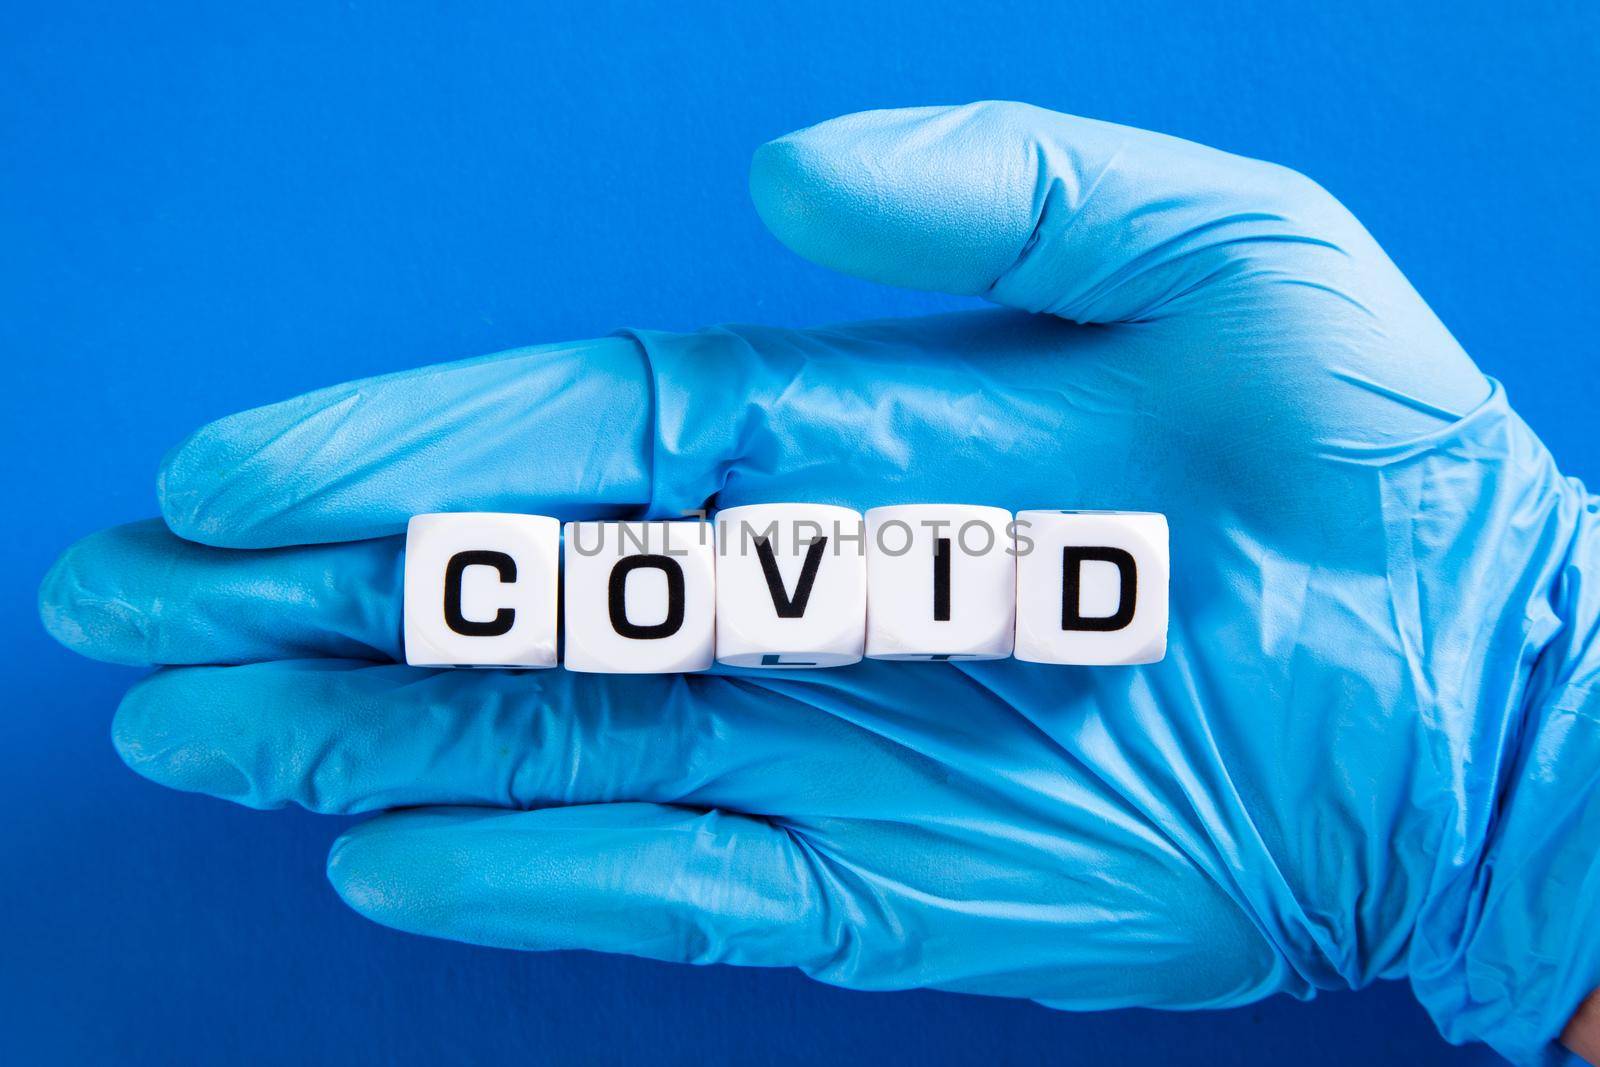 Hand in blue glove with Covid word. Medical and COVID-19 pandemic concept.